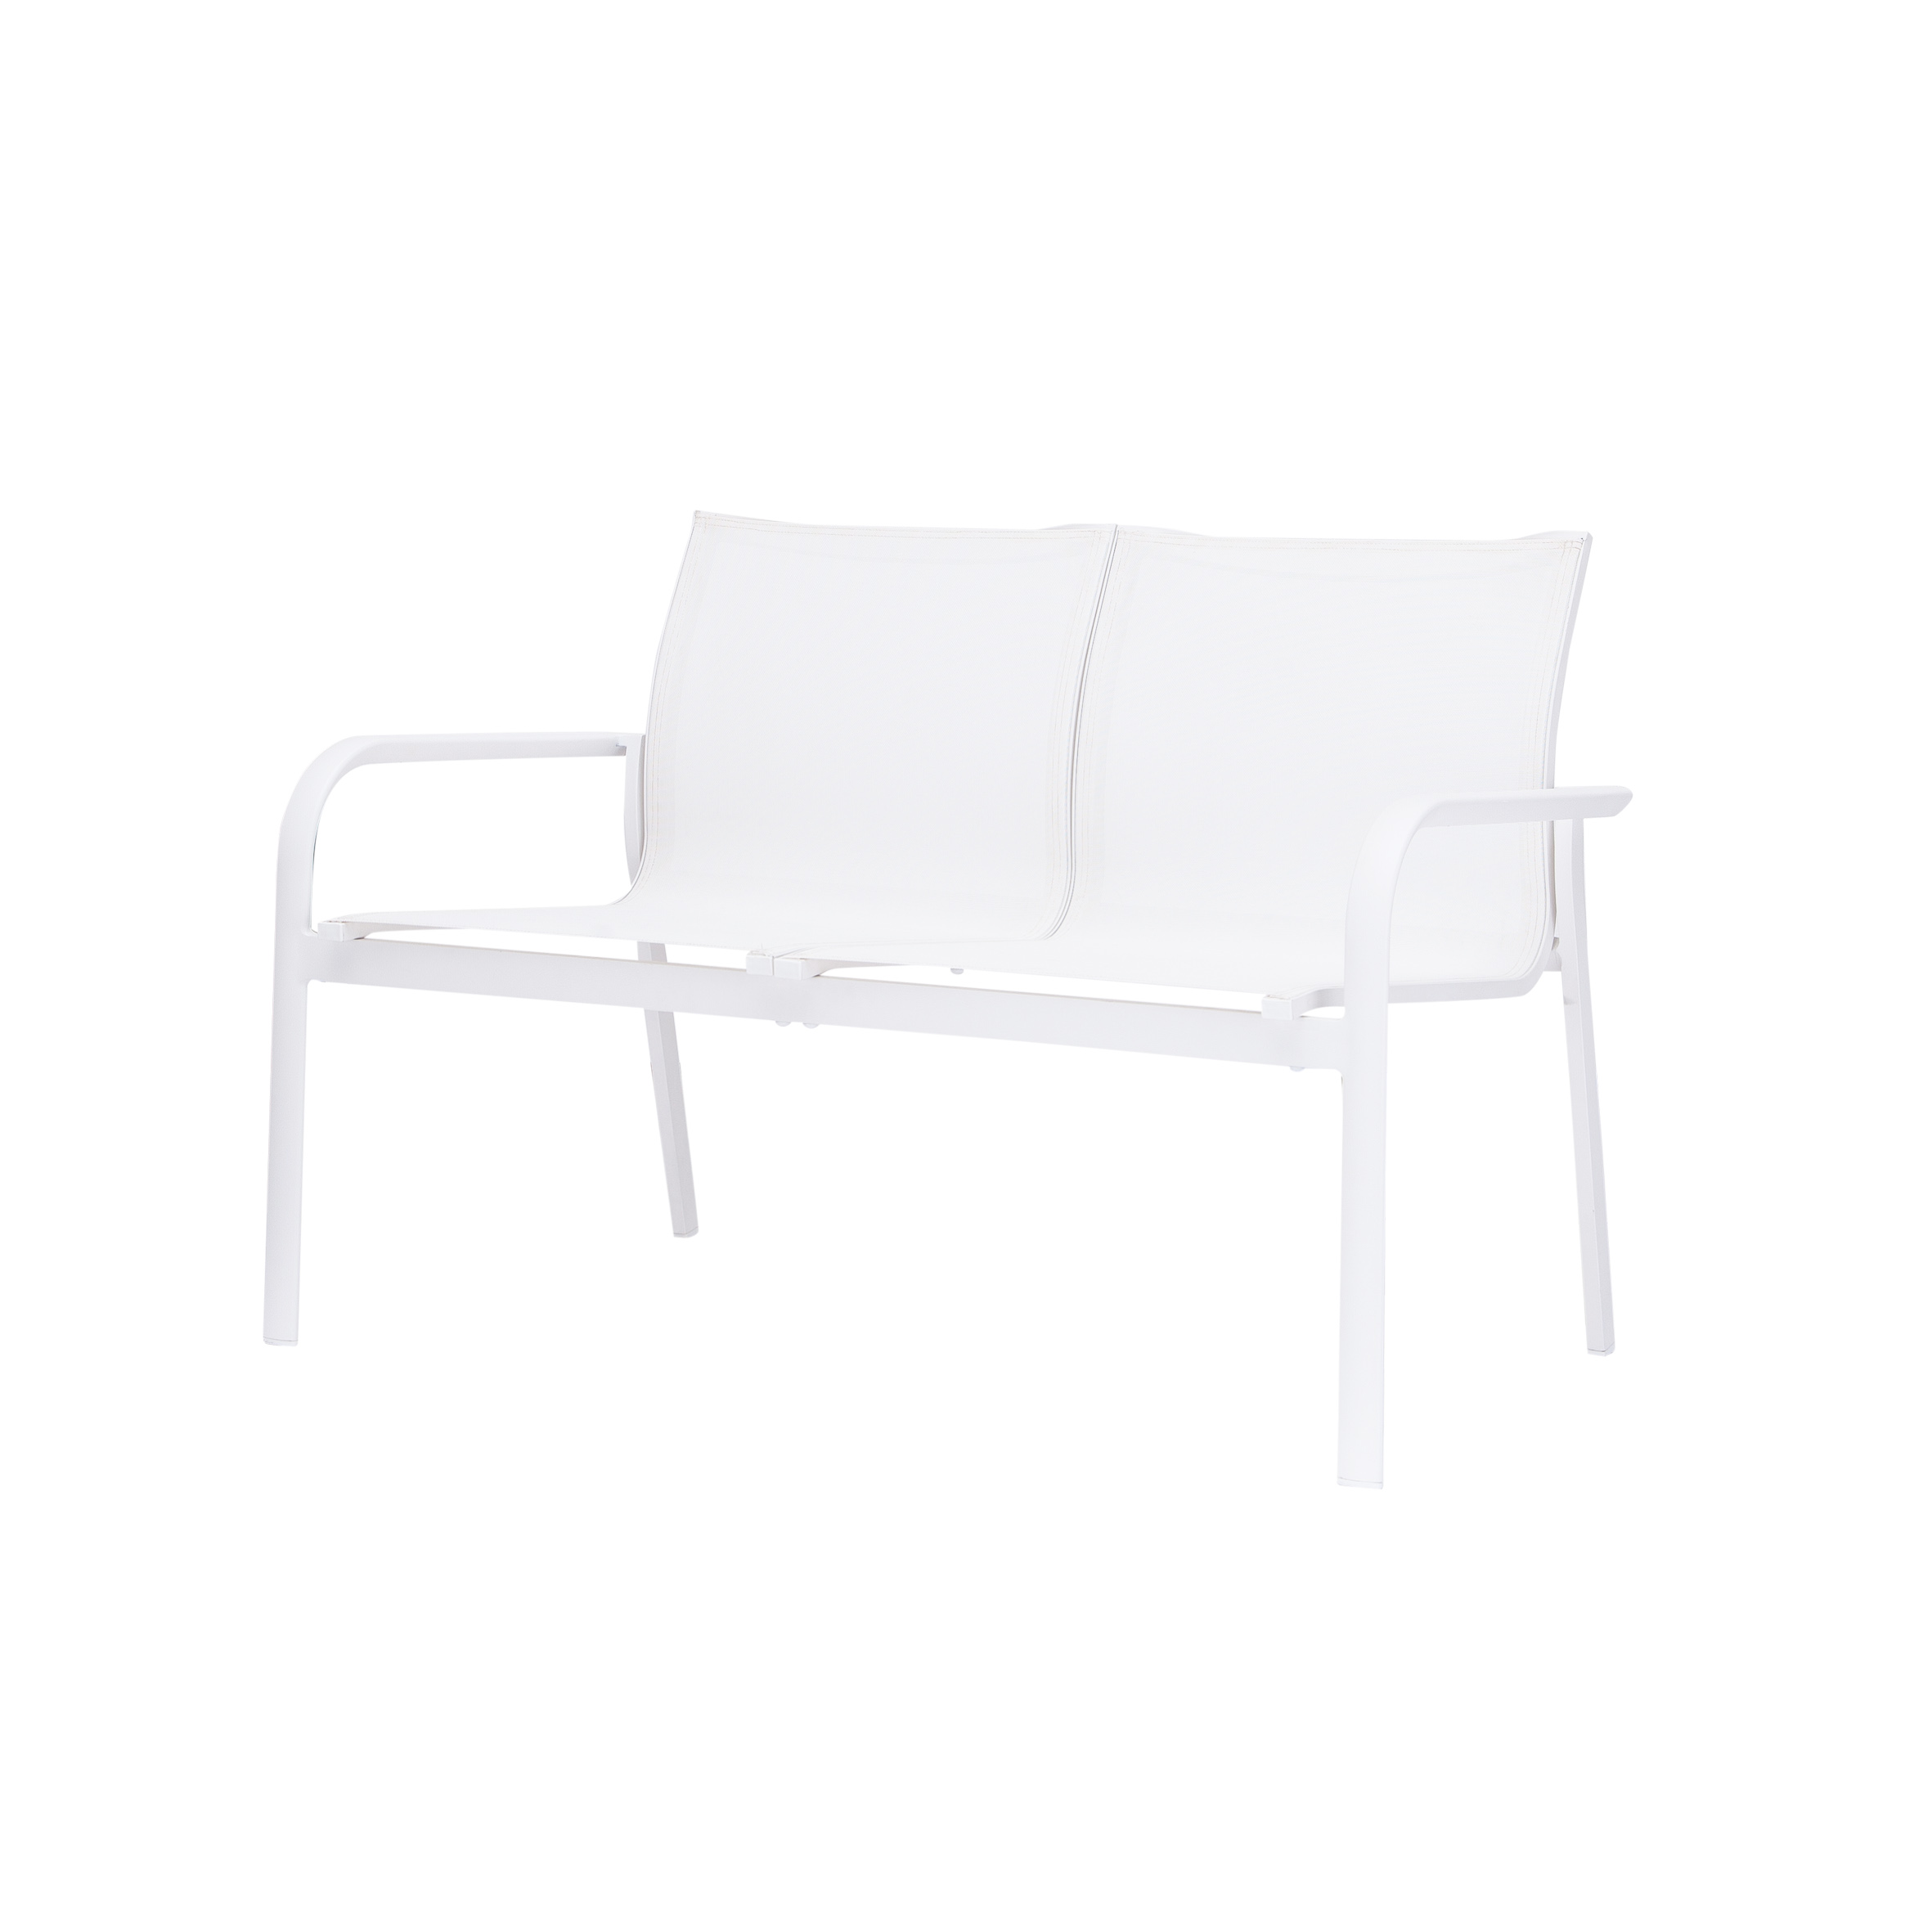 Space textile 2-seat chair S1